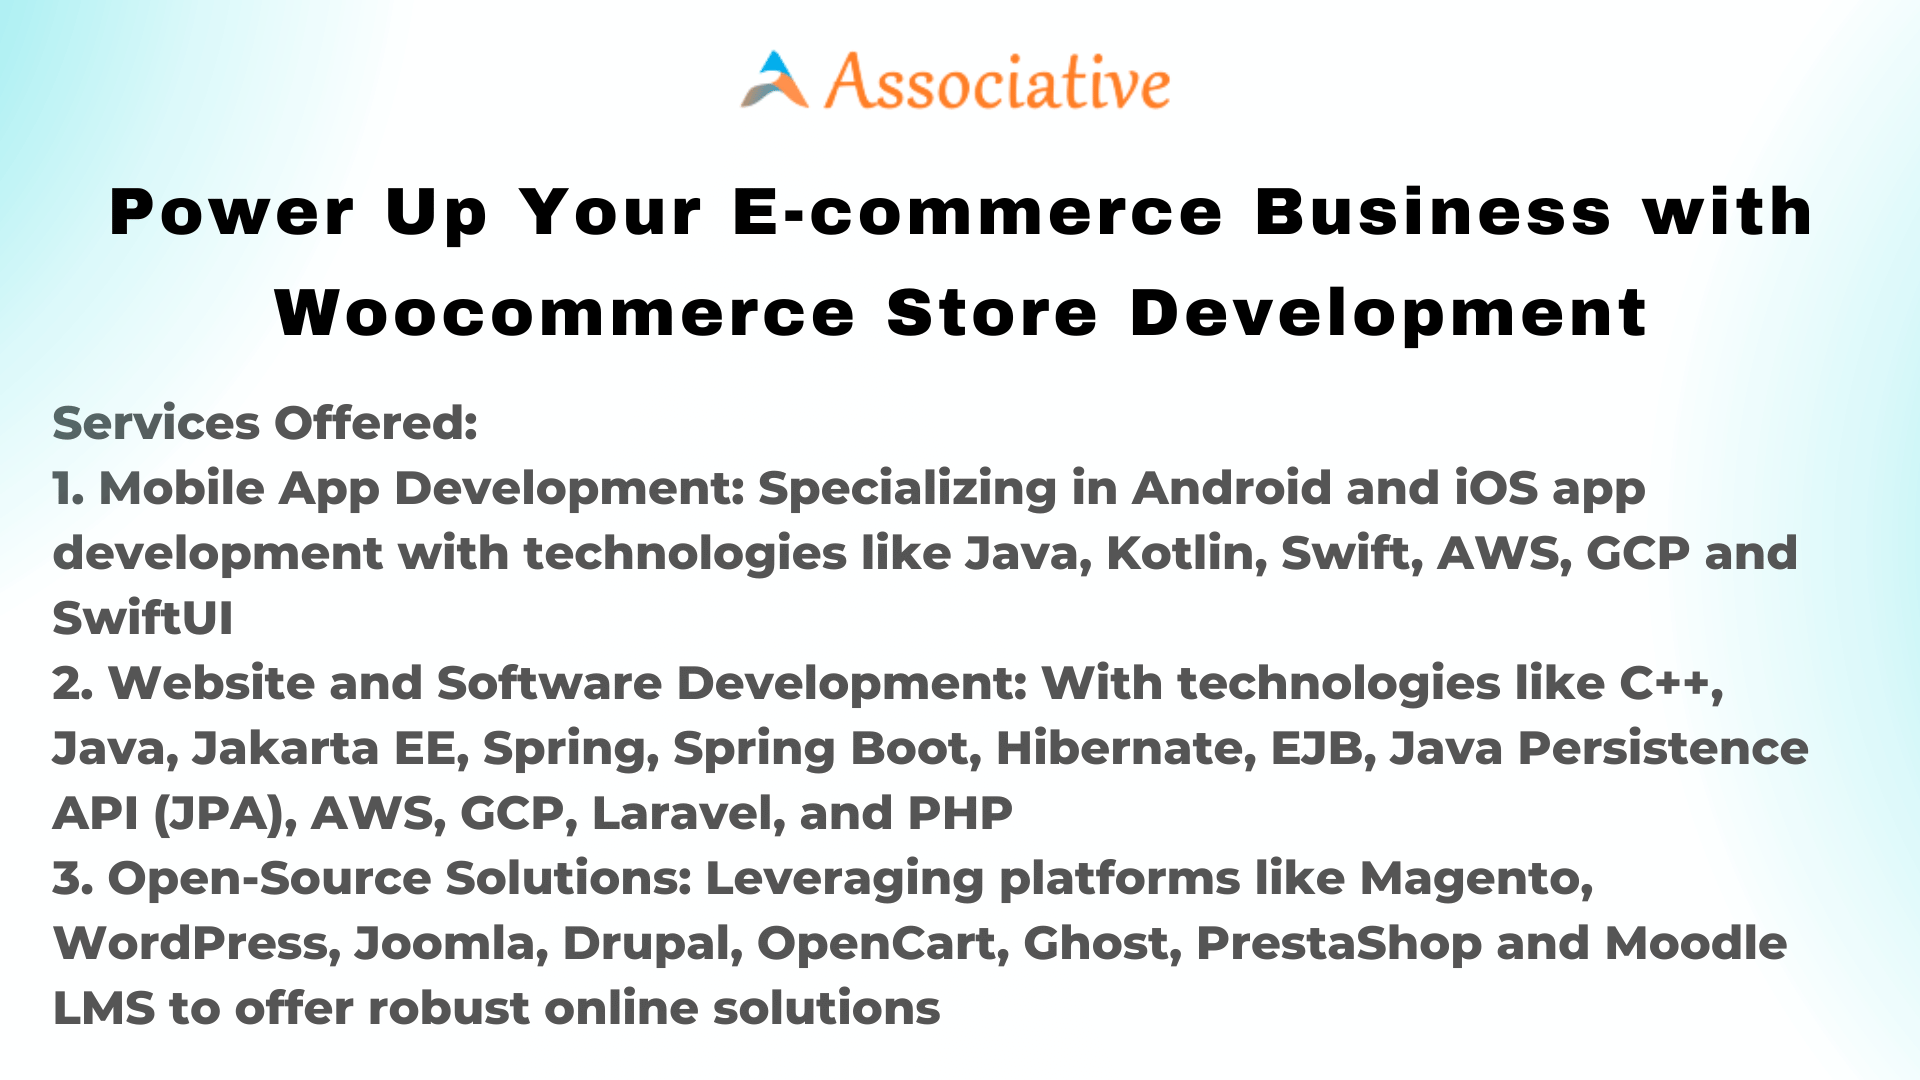 Power Up Your E-commerce Business with Woocommerce Store Development